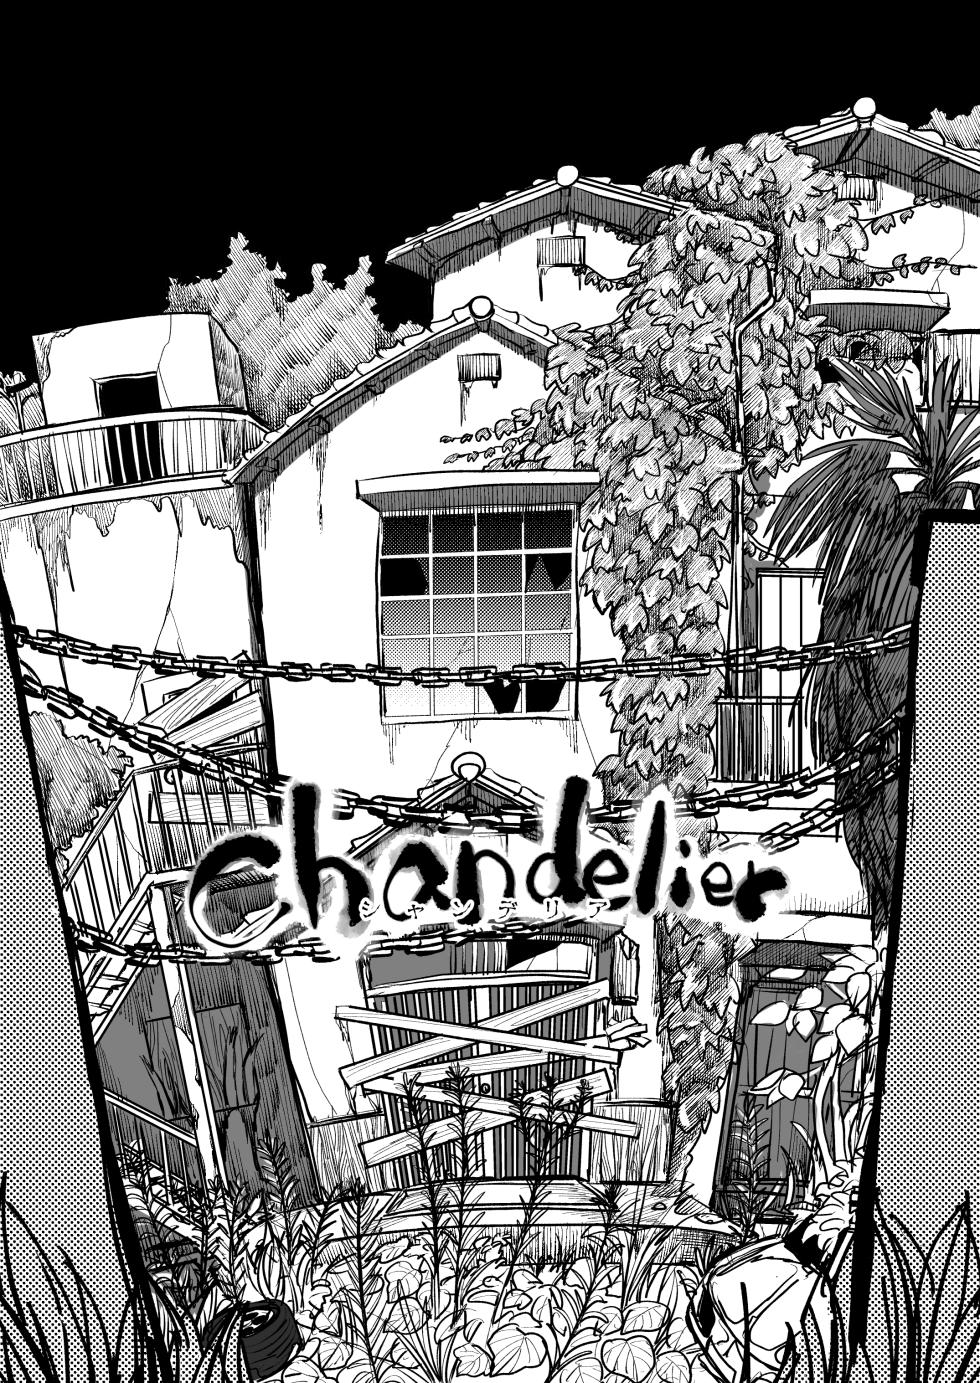 [Shimanami (Archipelago)] Dead End House Anthology - (Chandelier/1.5/Exorcist/Spinoff/Rubber Downfall/DIY) [Ongoing] - Page 7